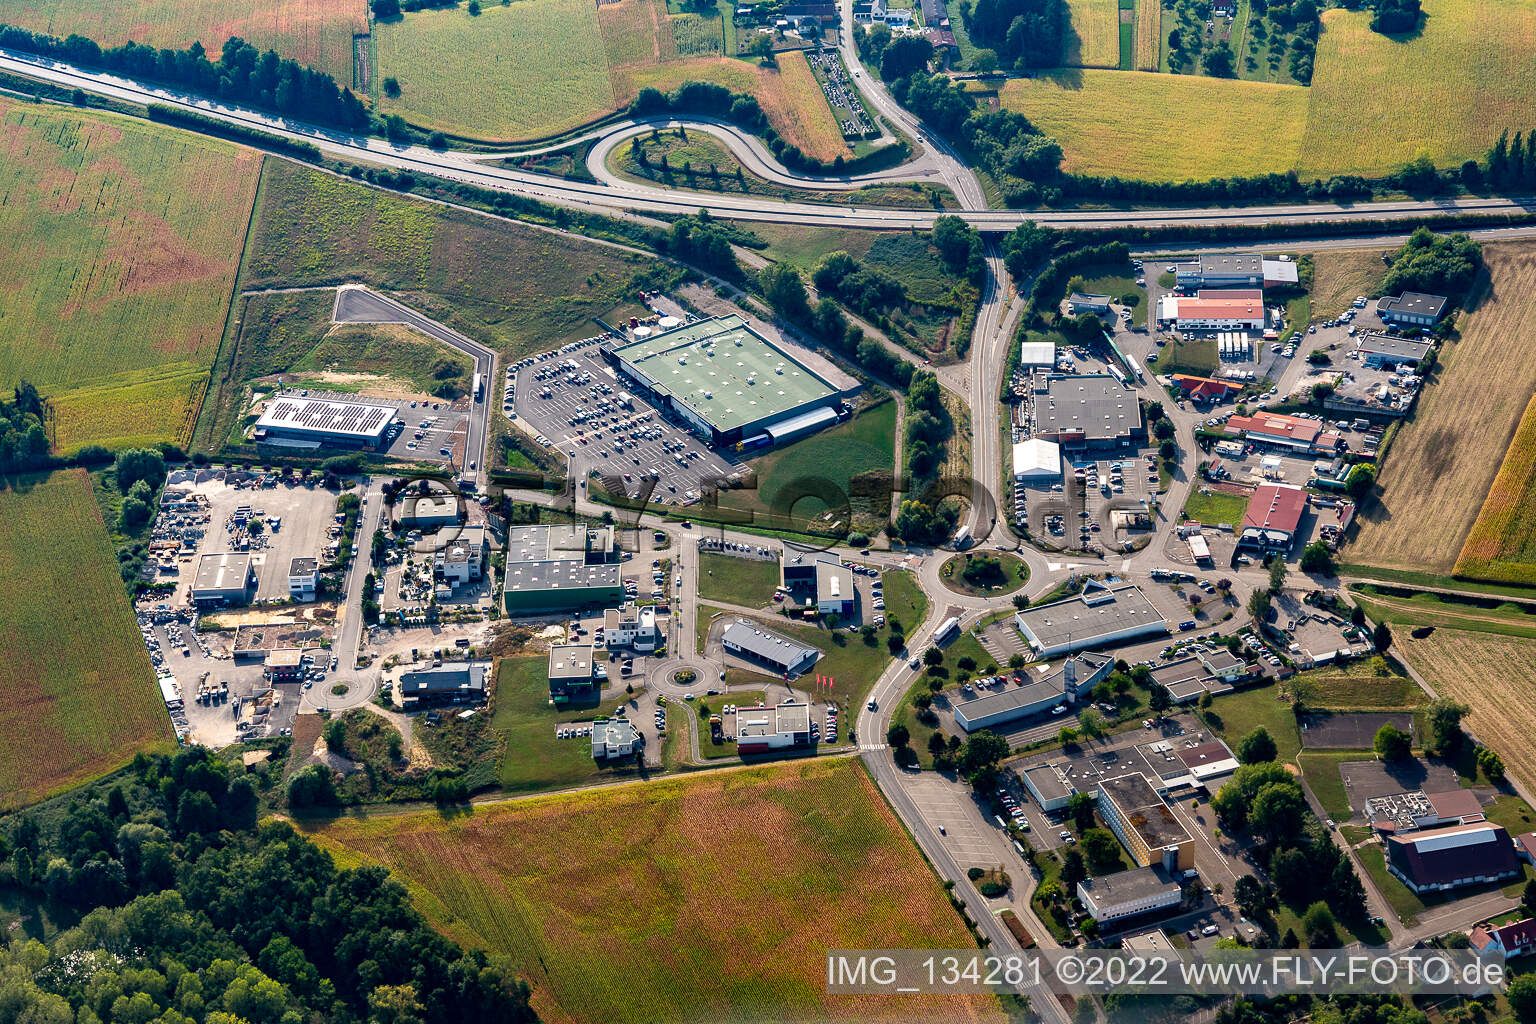 Industrial Estate in Soultz-sous-Forêts in the state Bas-Rhin, France